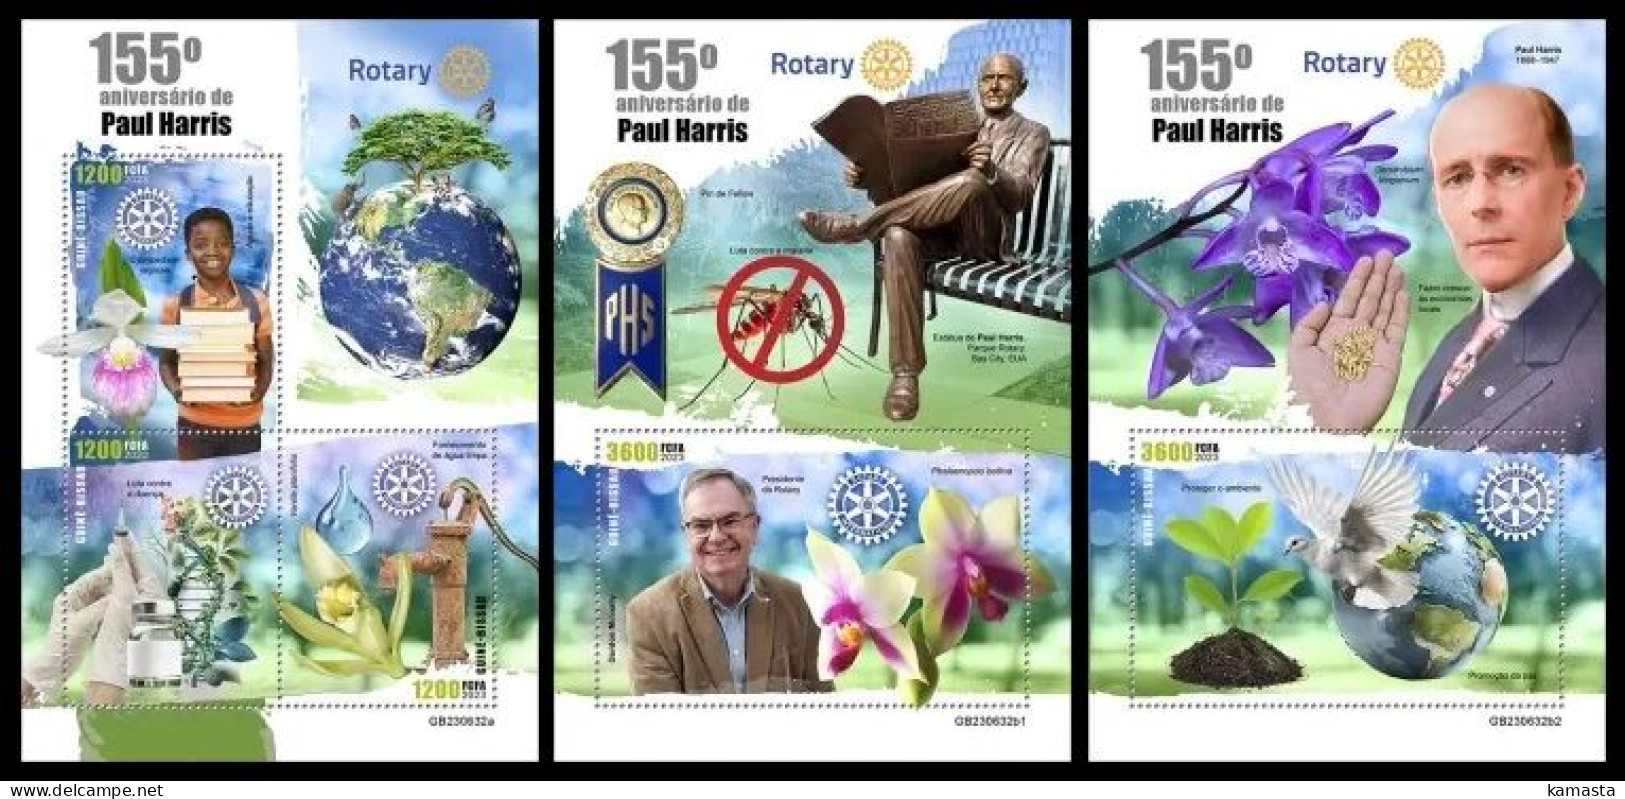 Guinea Bissau 2023 155th Anniversary Of Paul Harris. (632) OFFICIAL ISSUE - Rotary, Lions Club